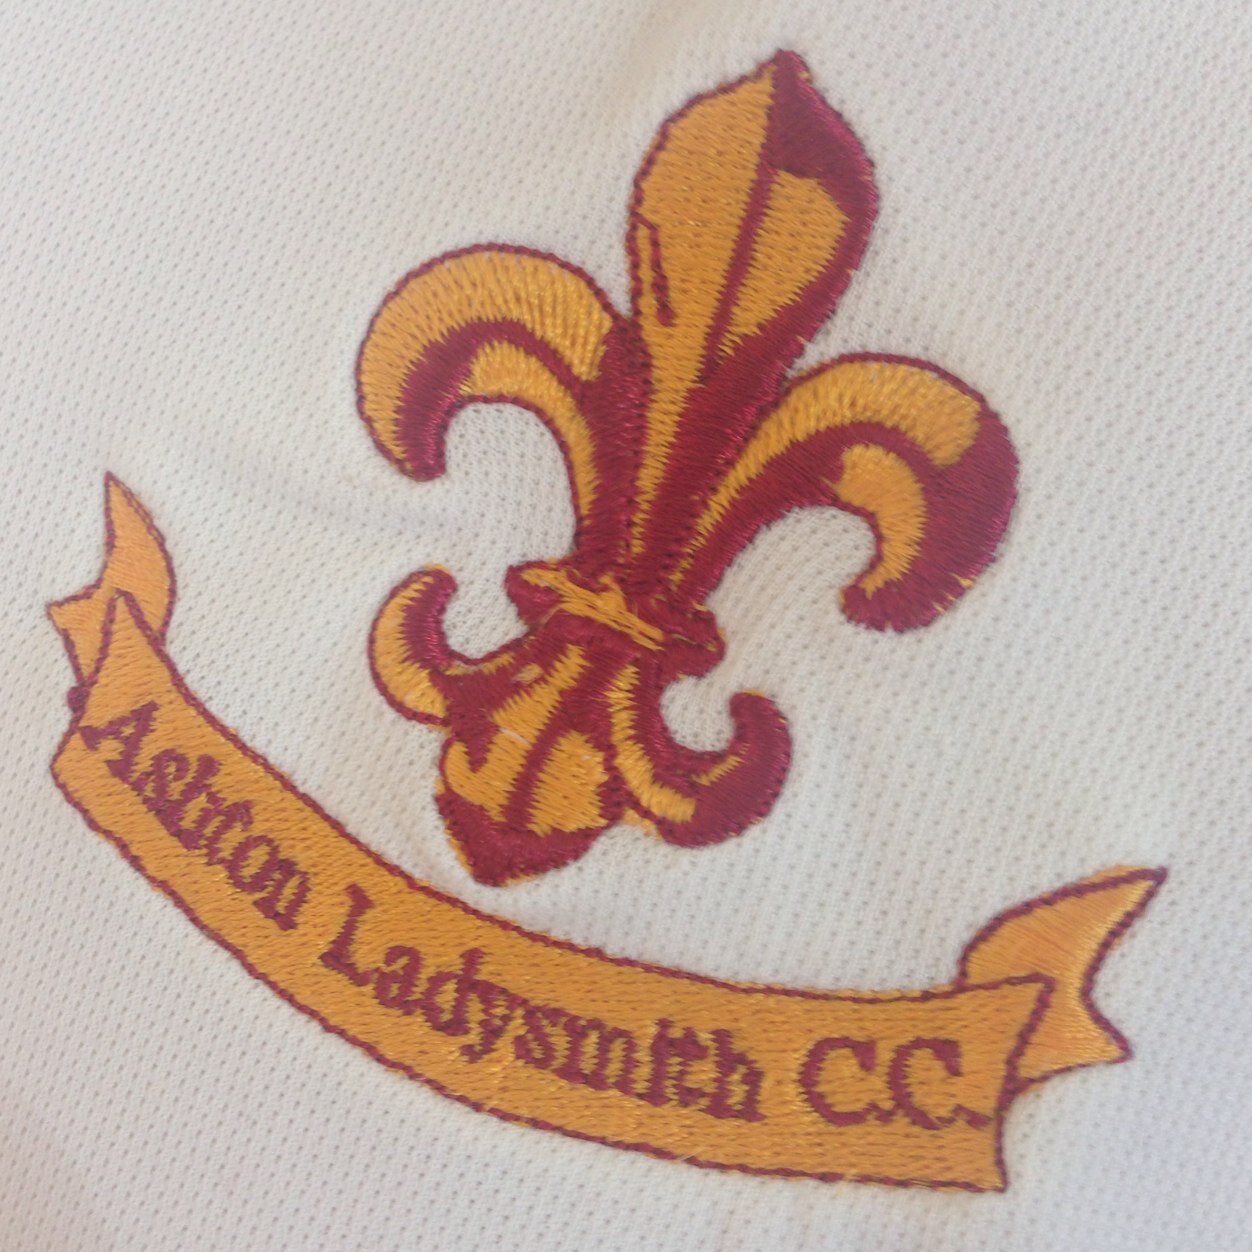 Ashton Ladysmith cricket club - news, events and match updates listed here